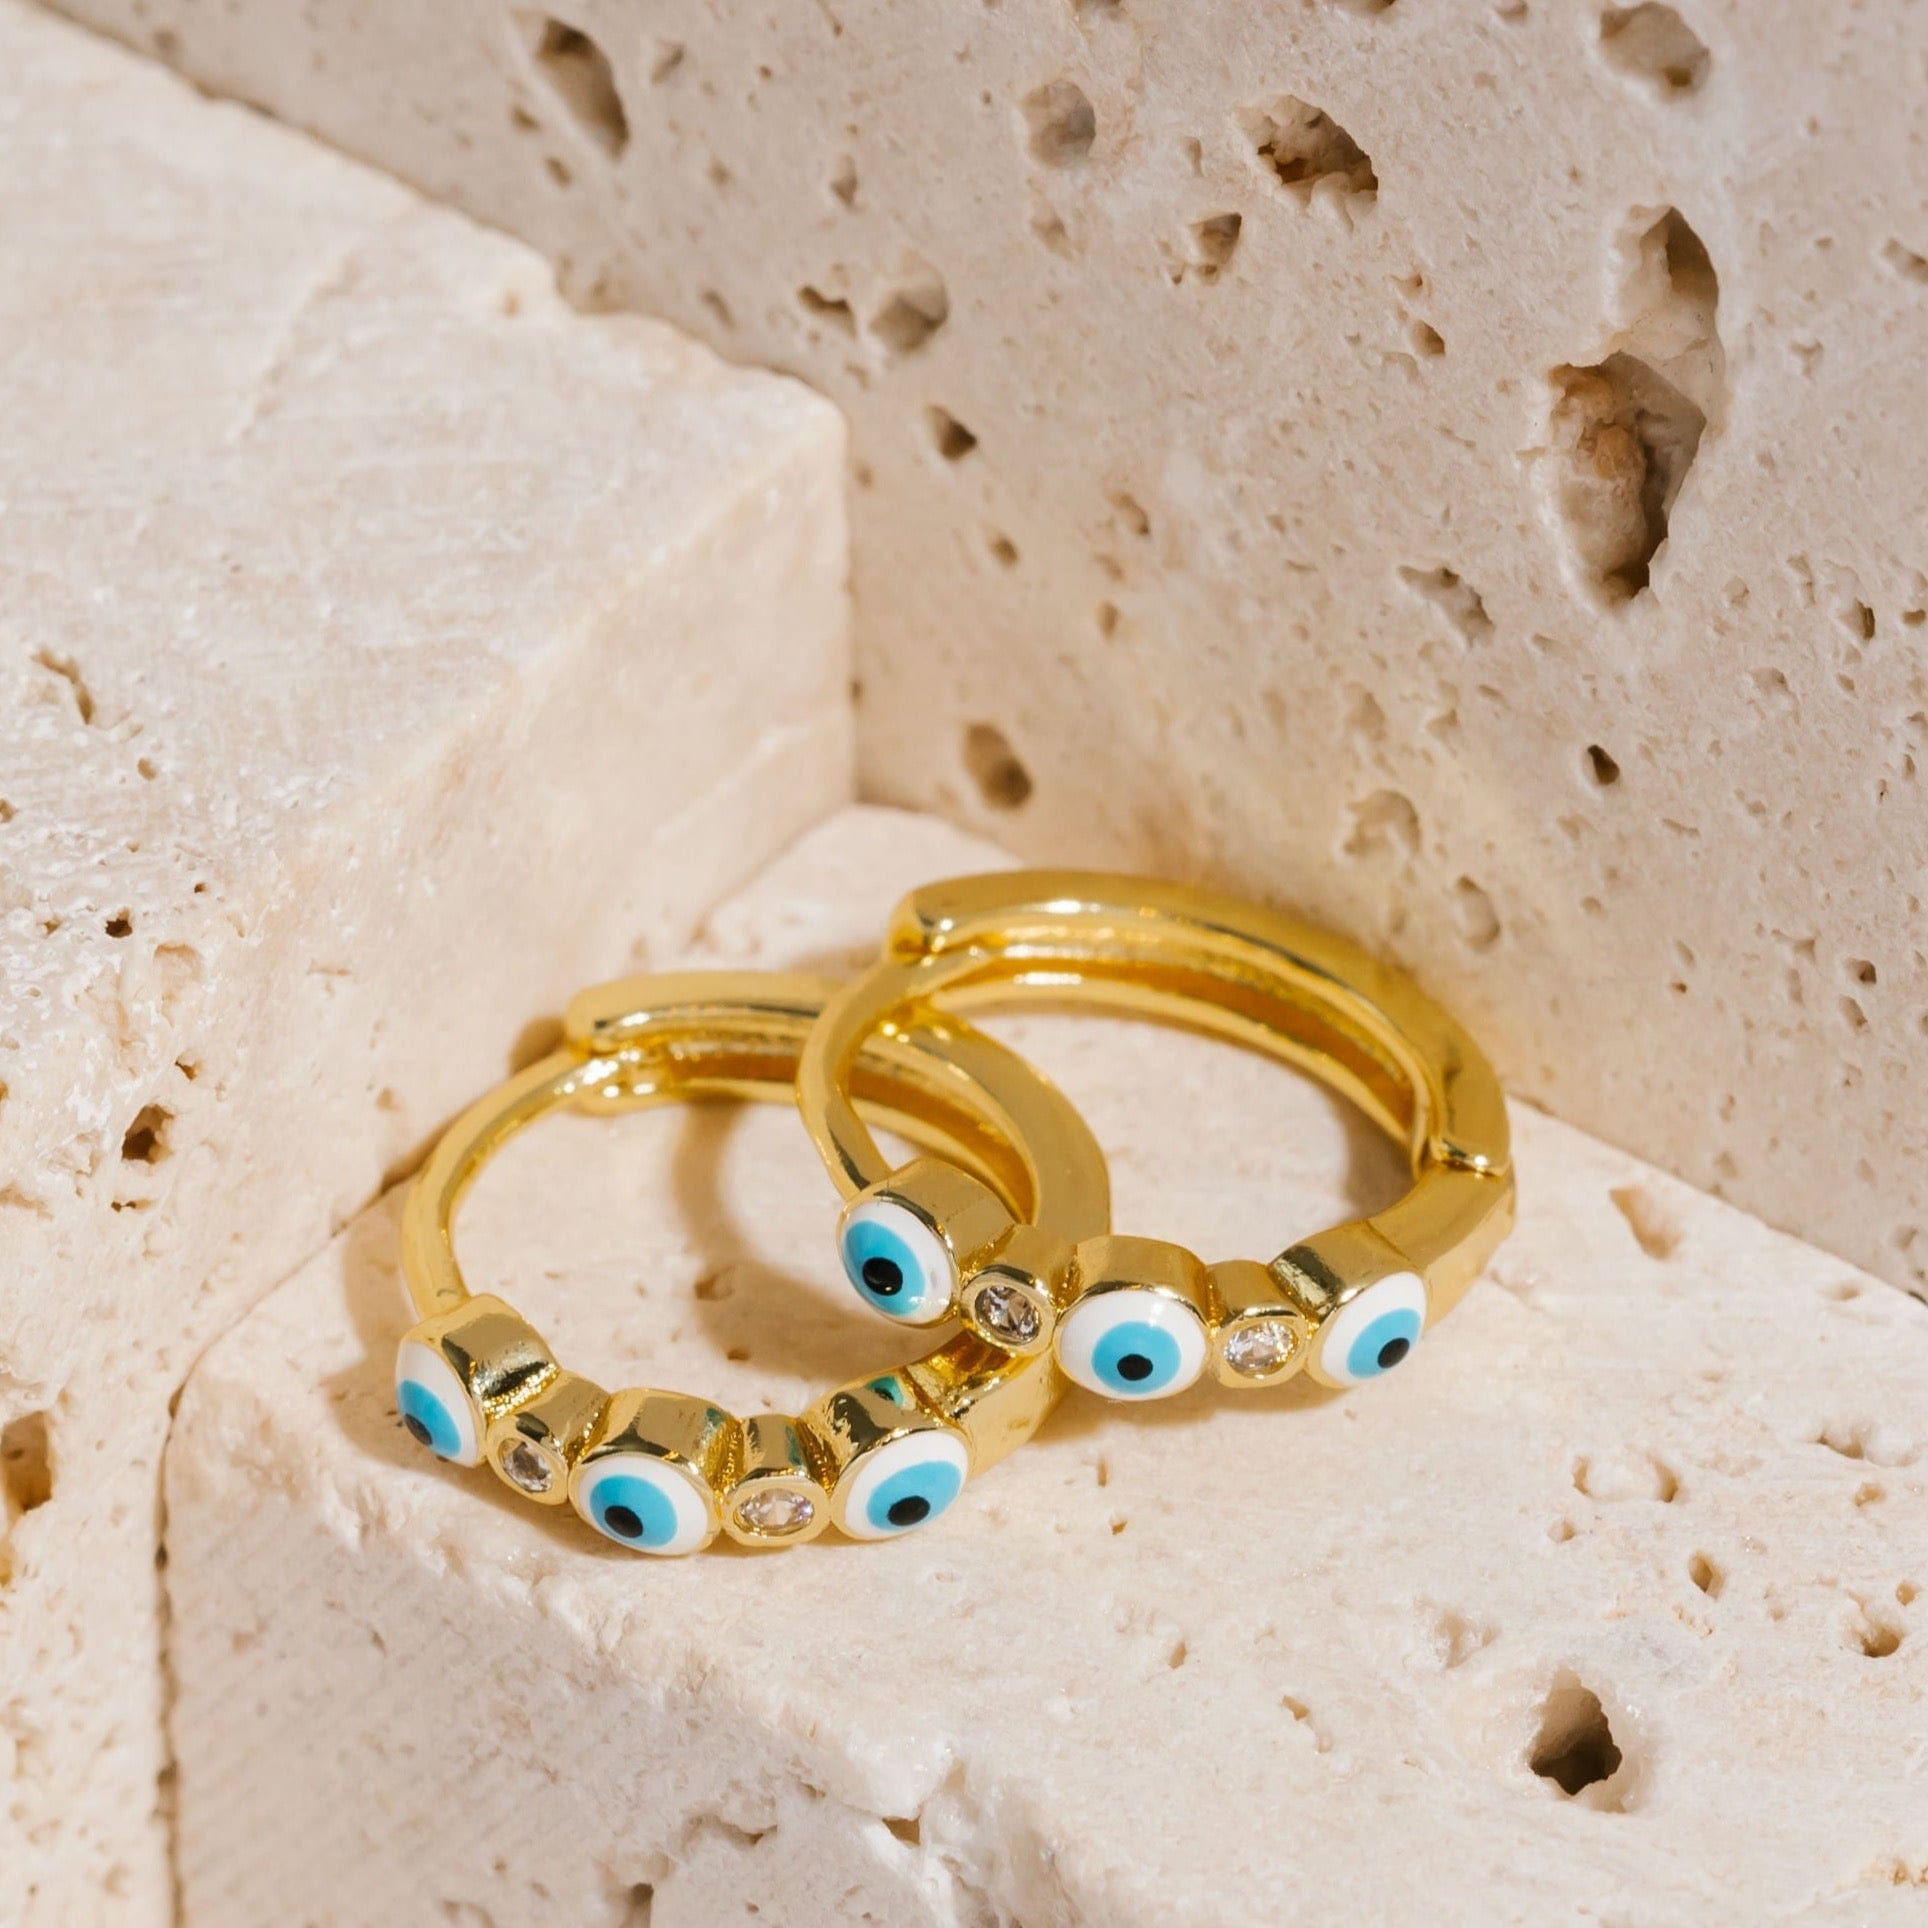 A pair of teal Evil Eye Hoop earrings lay on stone blocks, one earring propped on the other as the evil eye symbols and crystal accents stare outward from the golden hoop